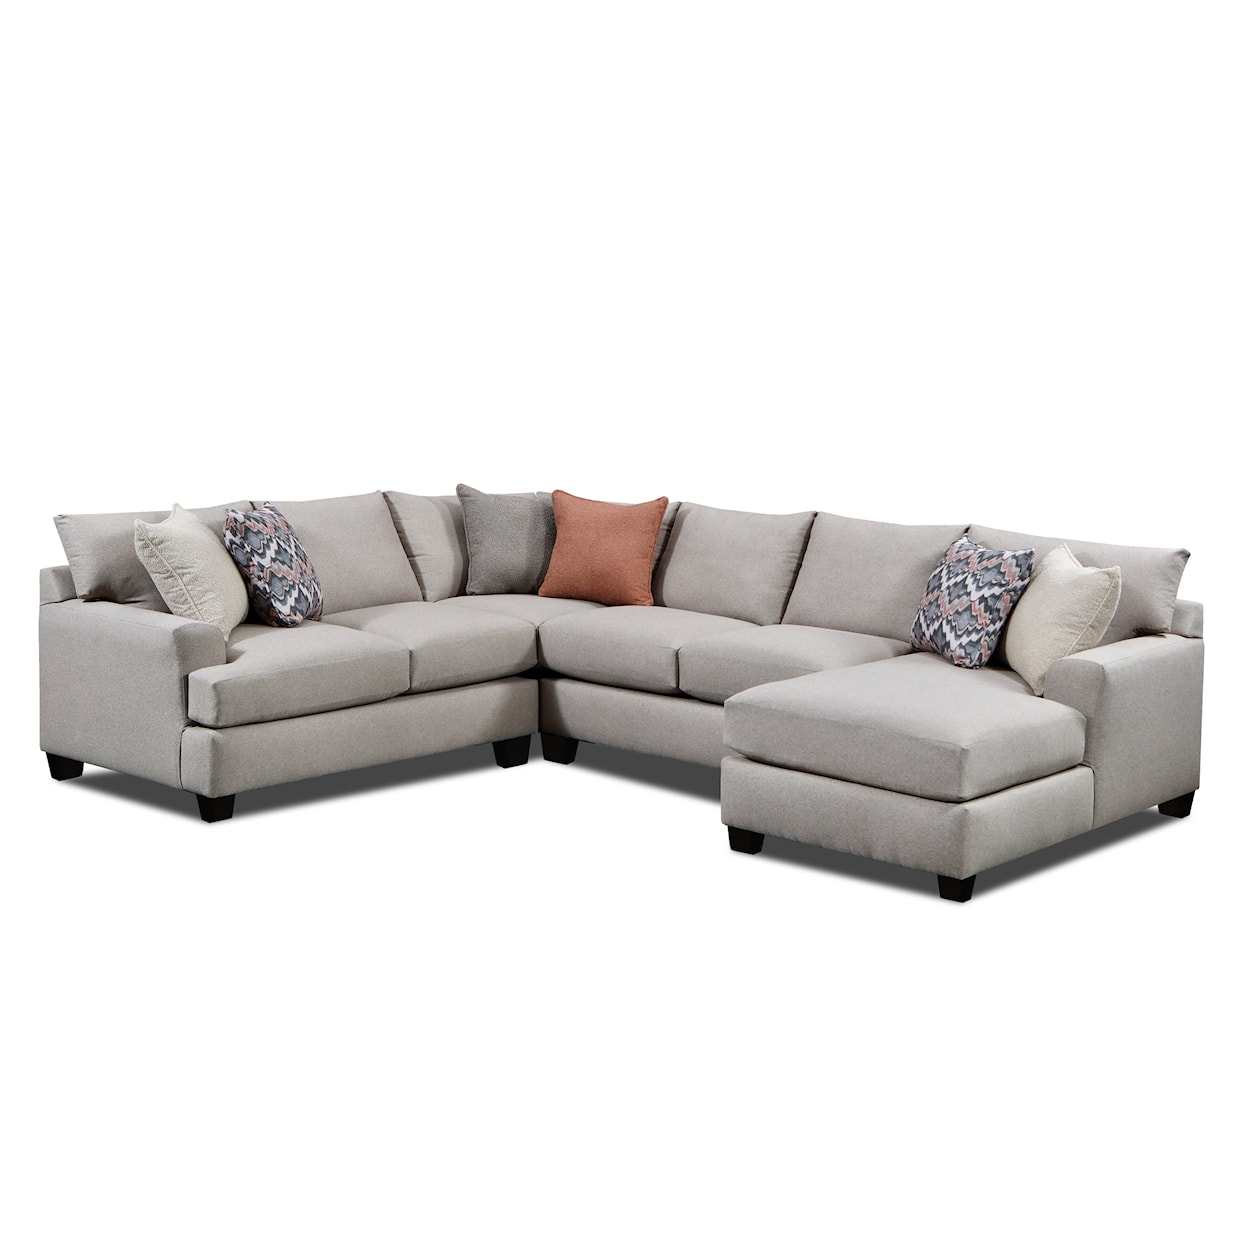 The Mix Emerson 5-Seat Sectional Sofa